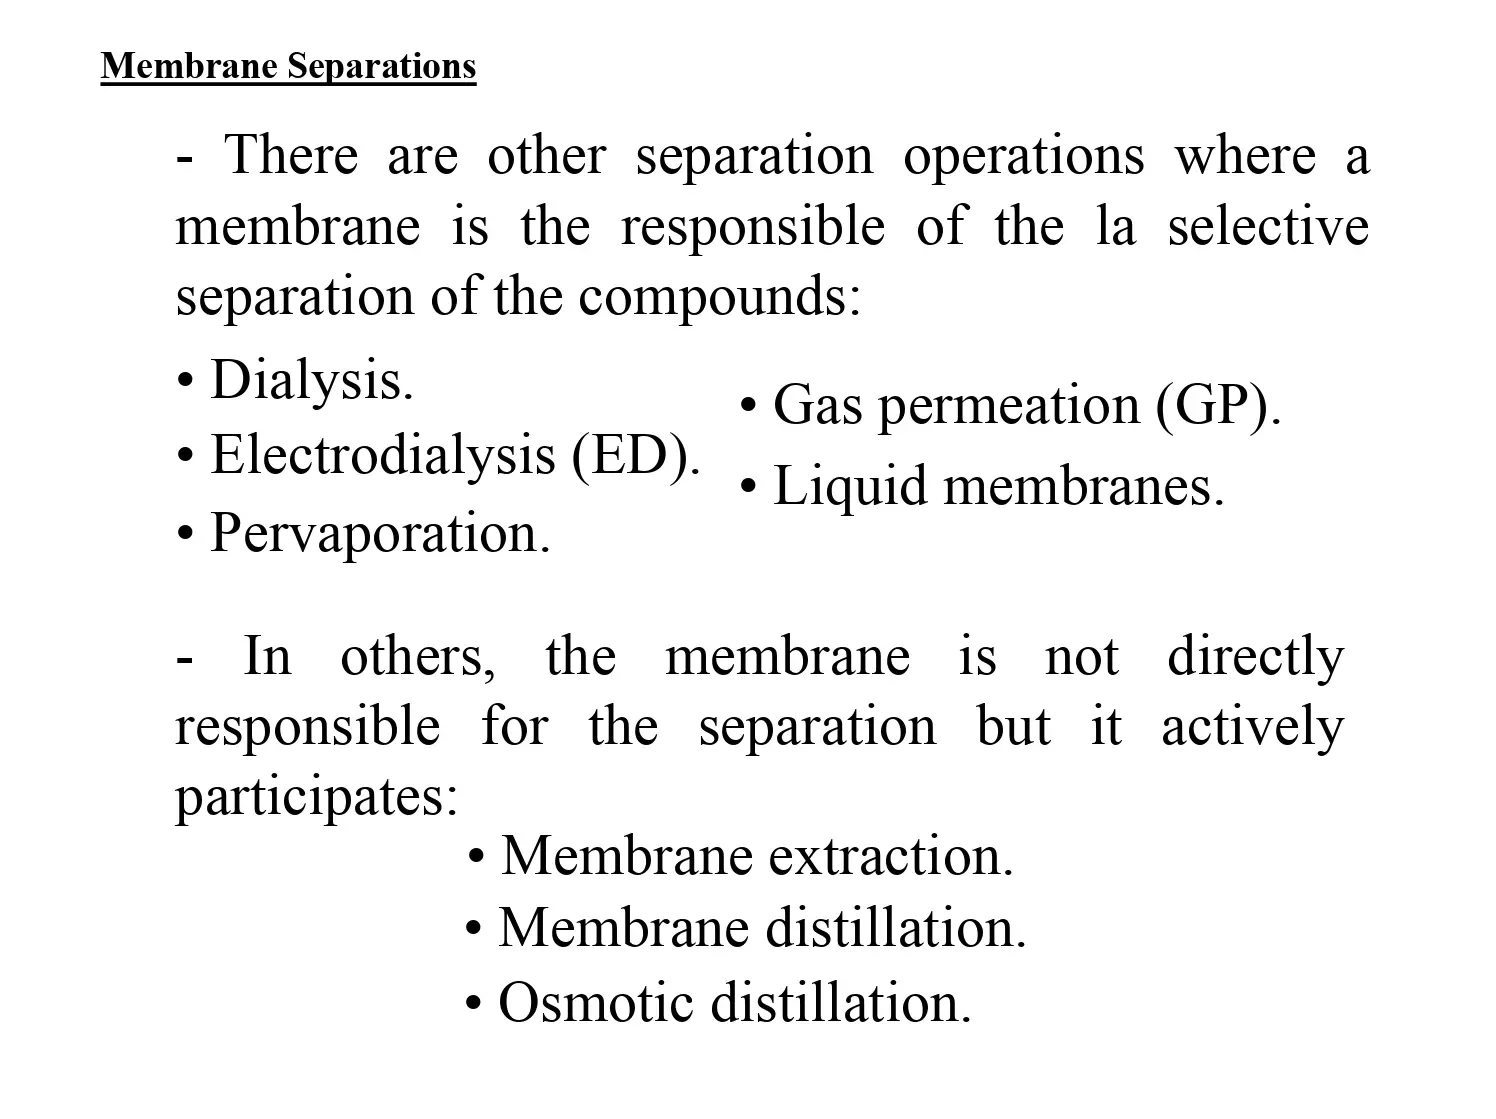 Membrane Separations - Other Separation Operations